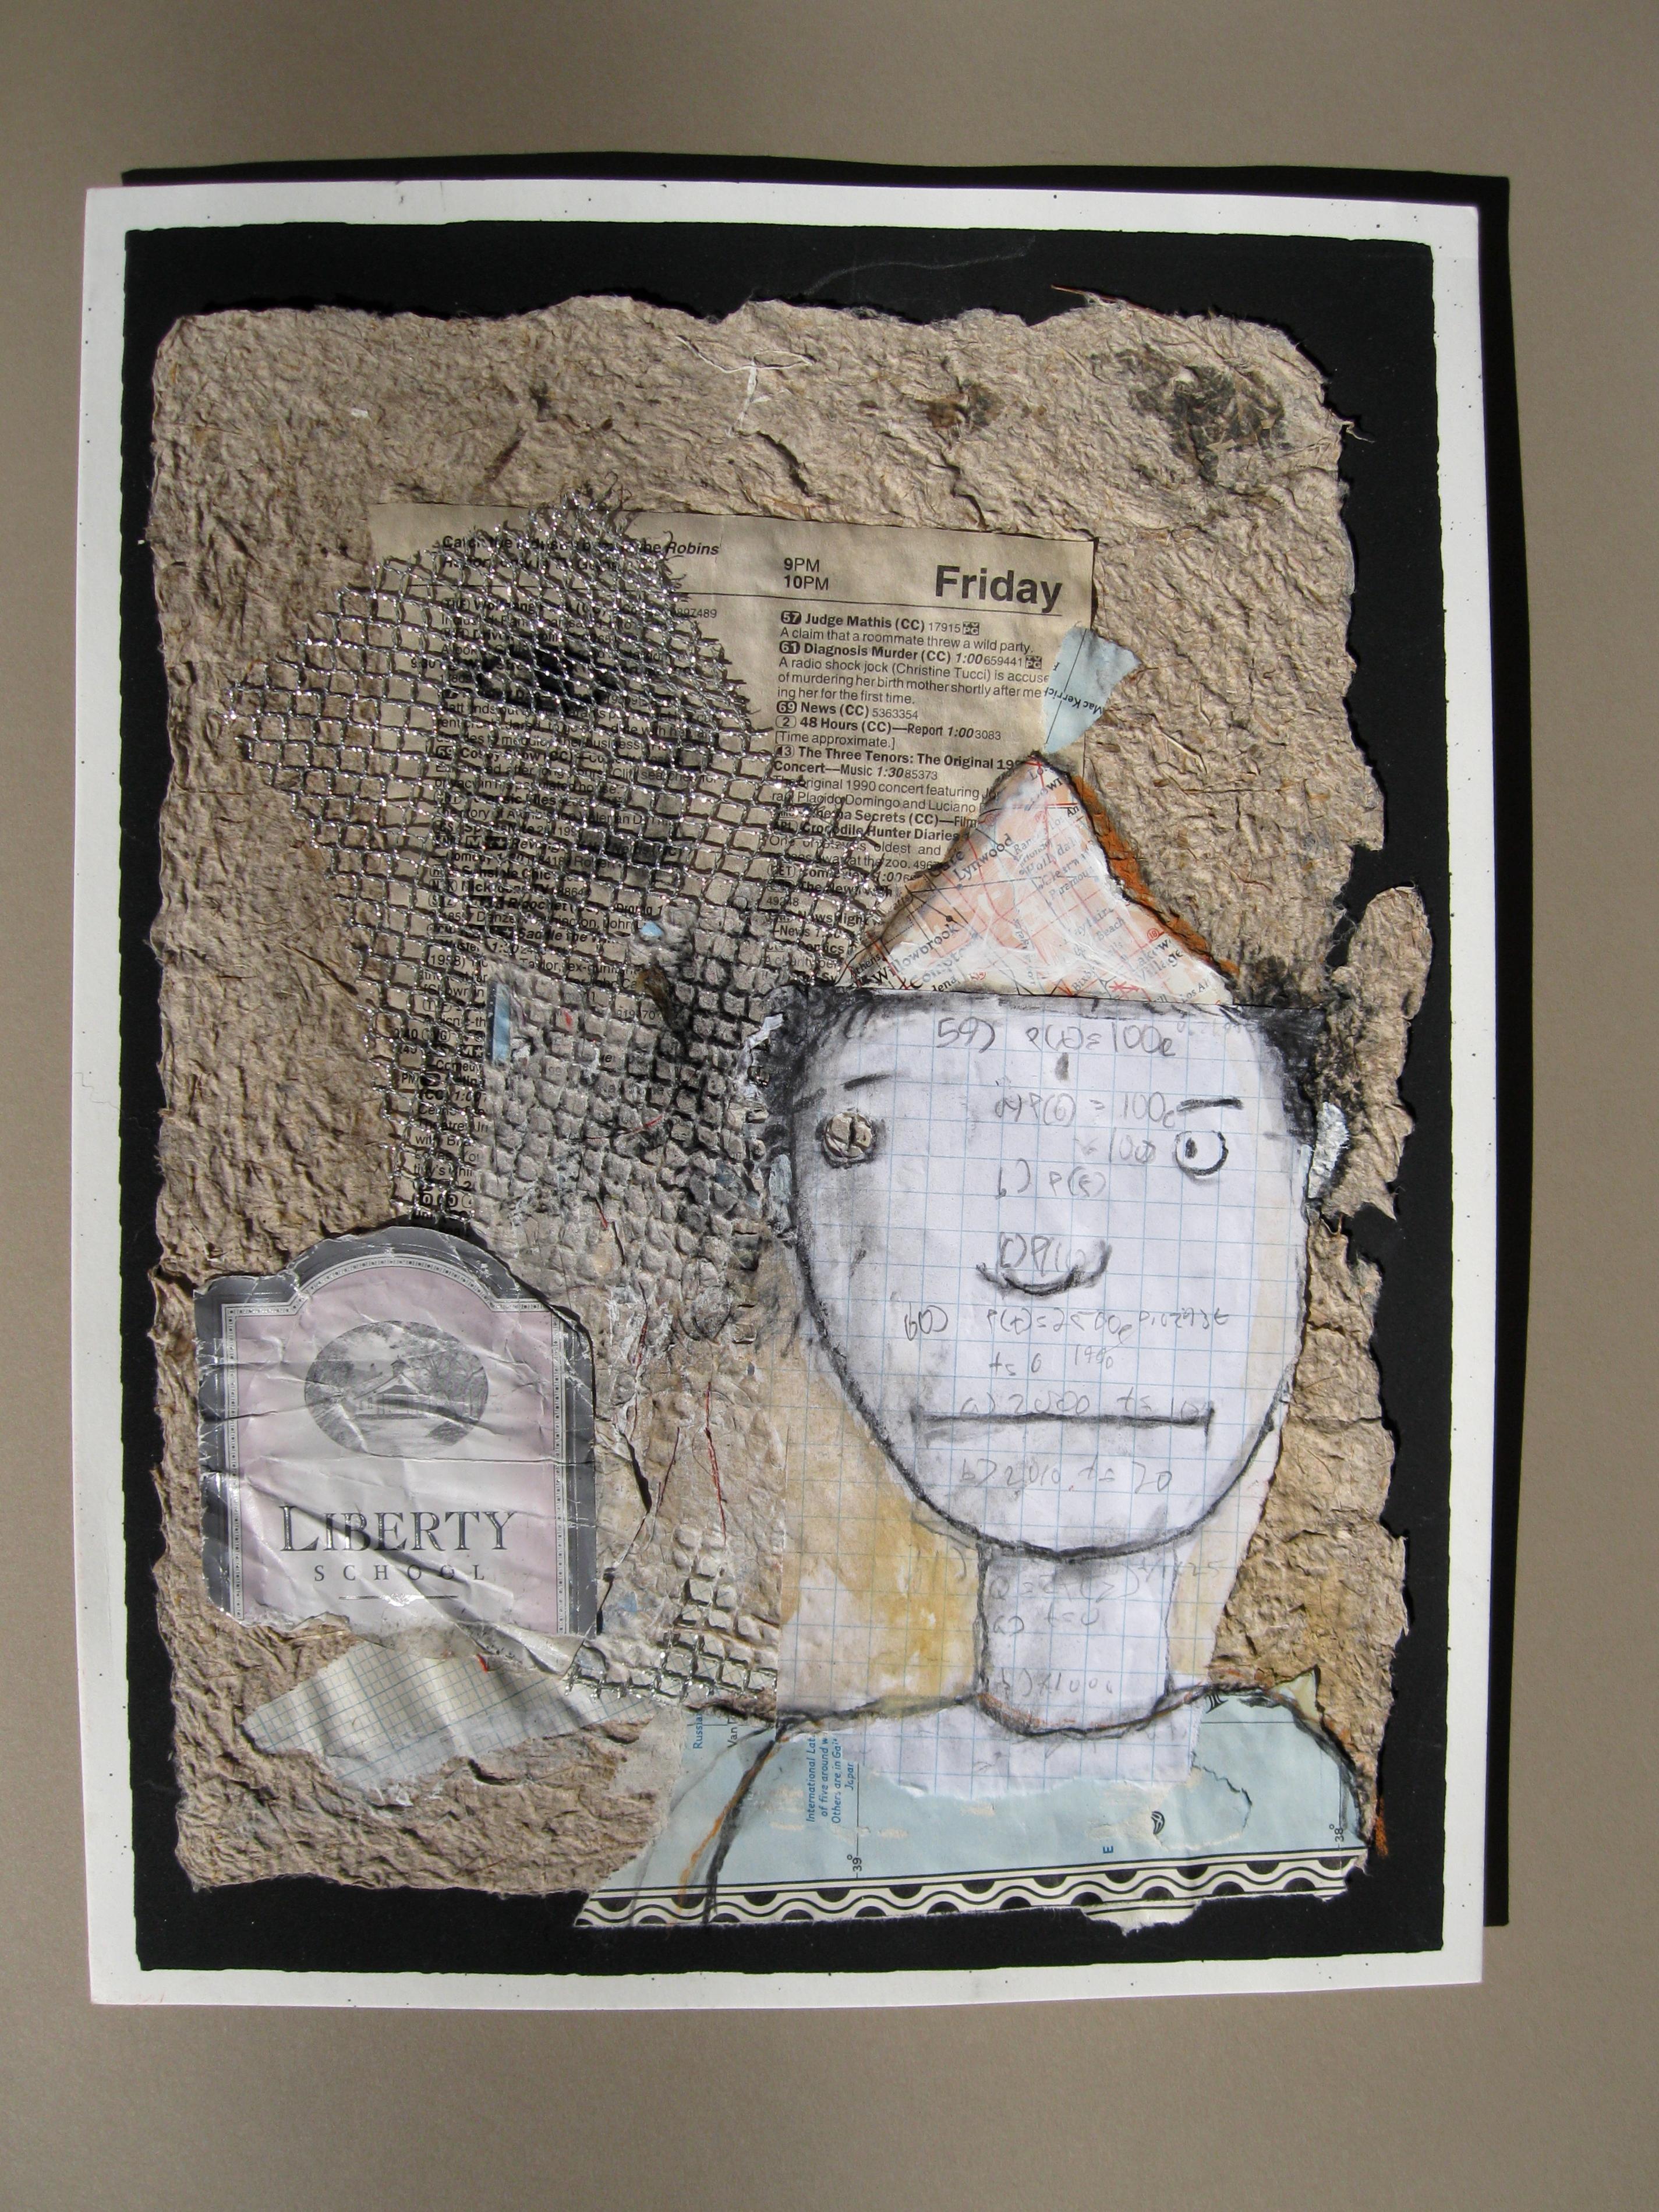 <p>Artist Comments<br /> ;Friday Night; is a mixed media work composed of charcoal, maps, homework, wine labels, fabric, and a t.v. guide on handmade paper. I assembled this piece with the theme of a student on a friday night in mind. The end of the